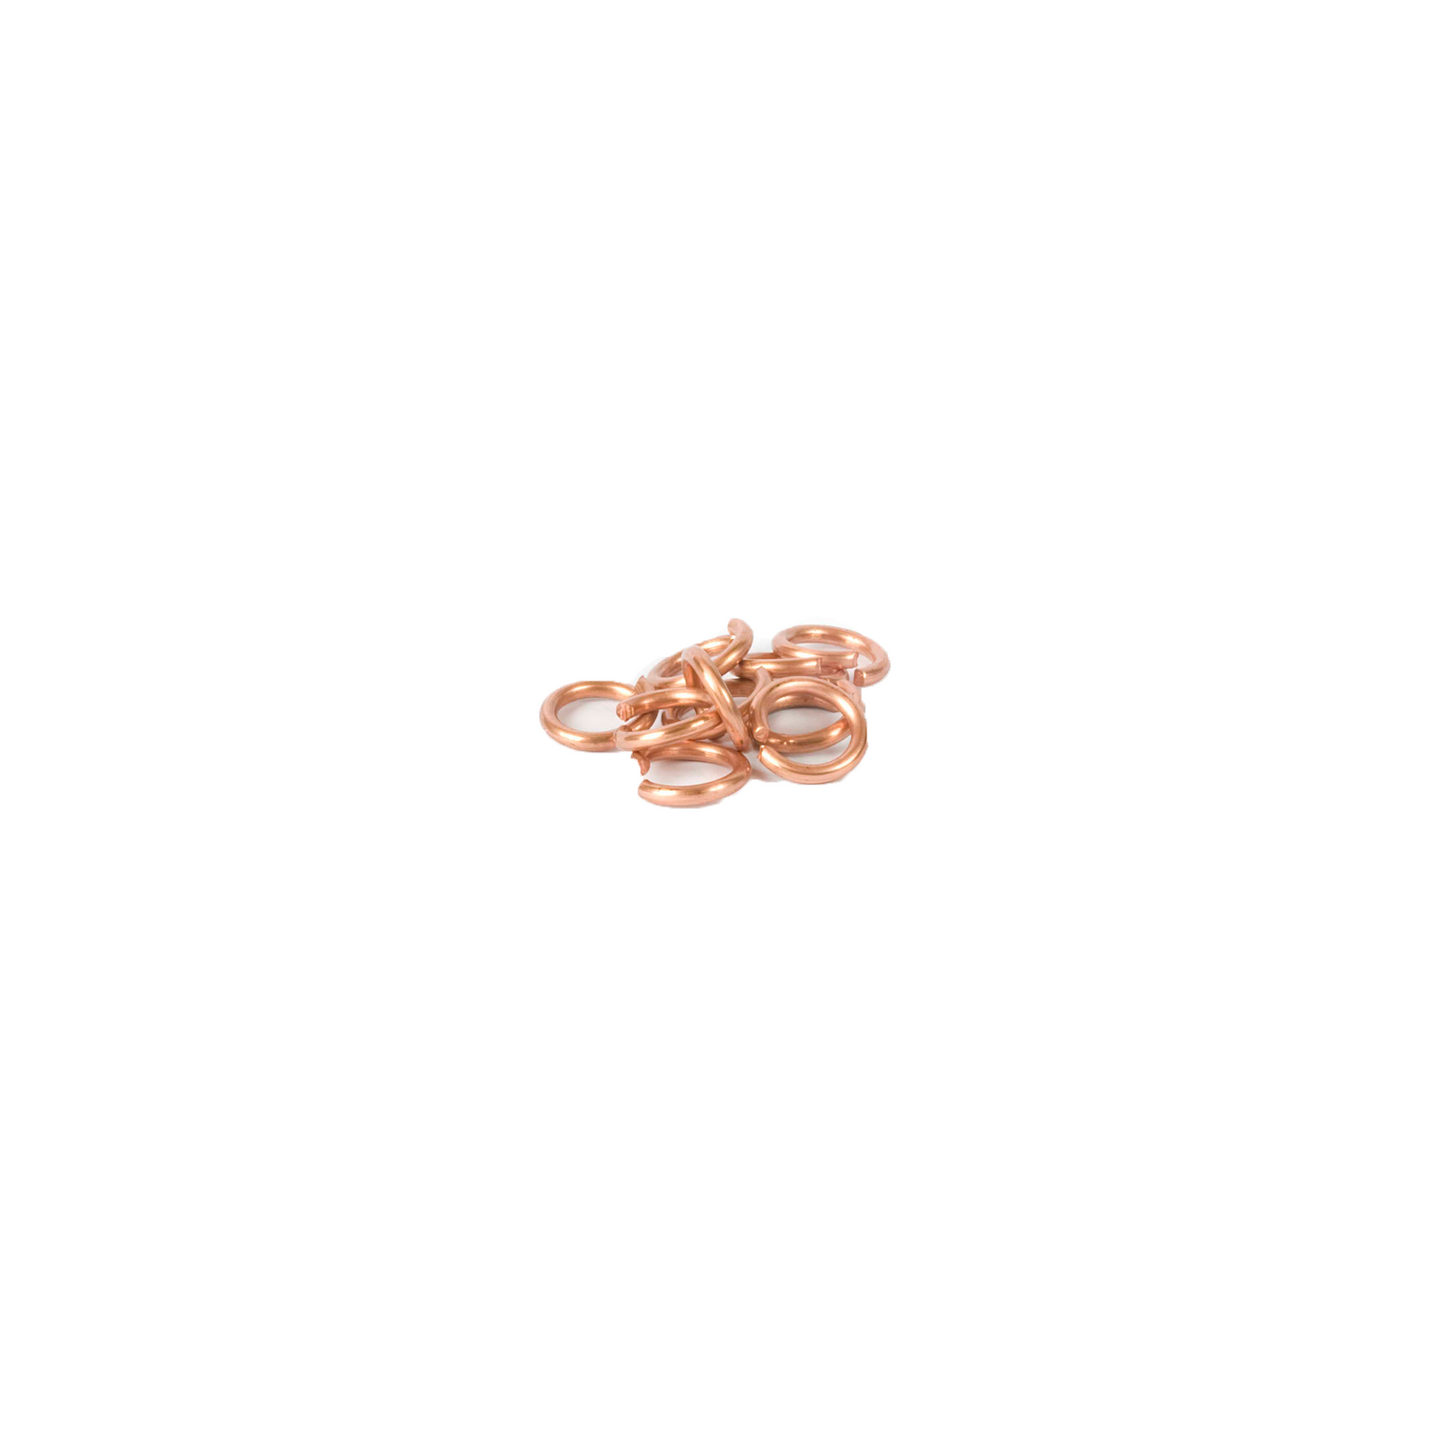 Copper rings for chains (x10) - Nienhuis AMI